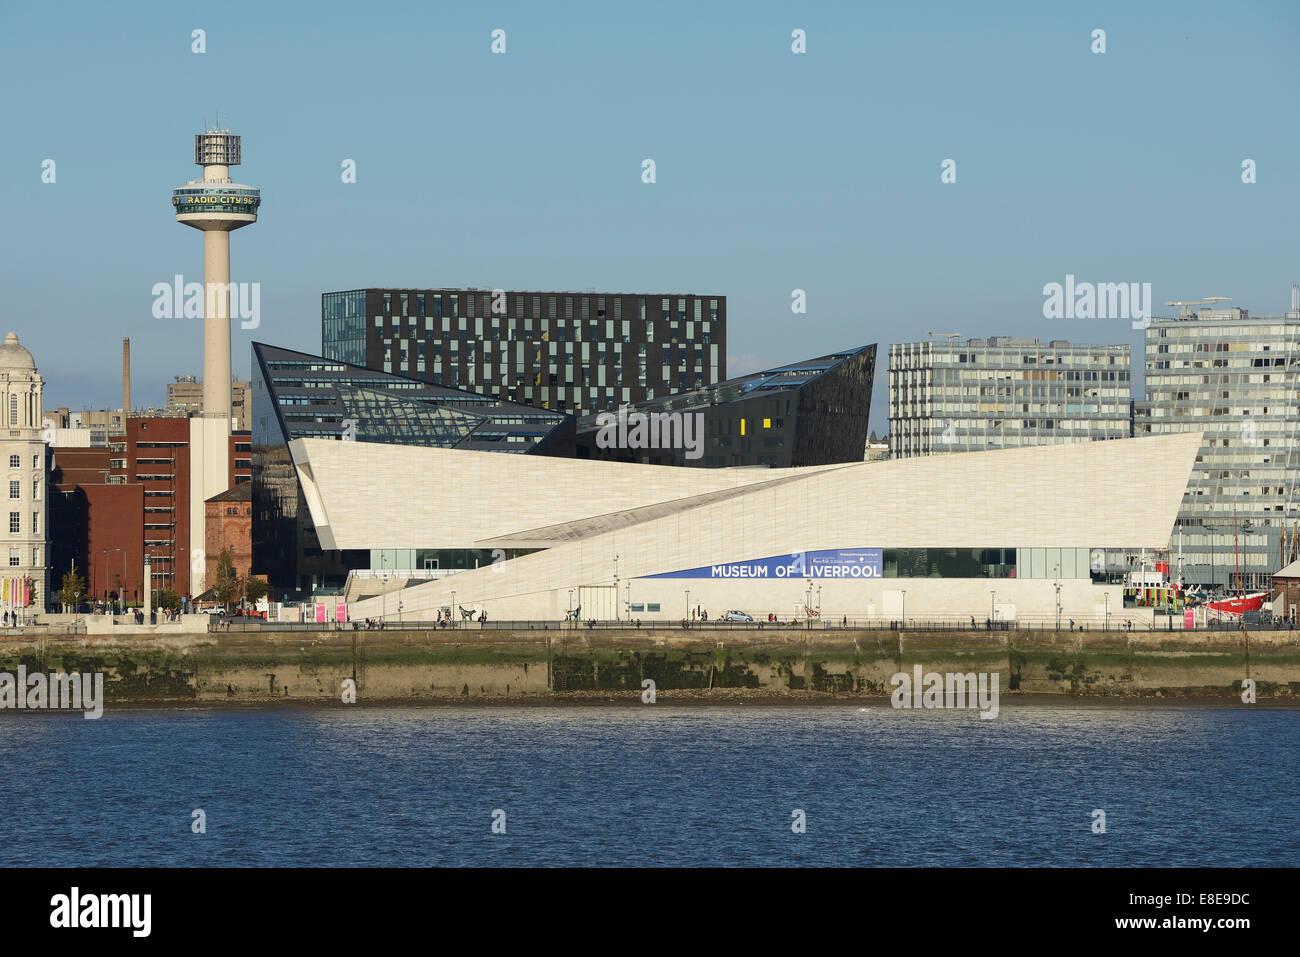 St Johns Tower and the Museum of Liverpool Stock Photo